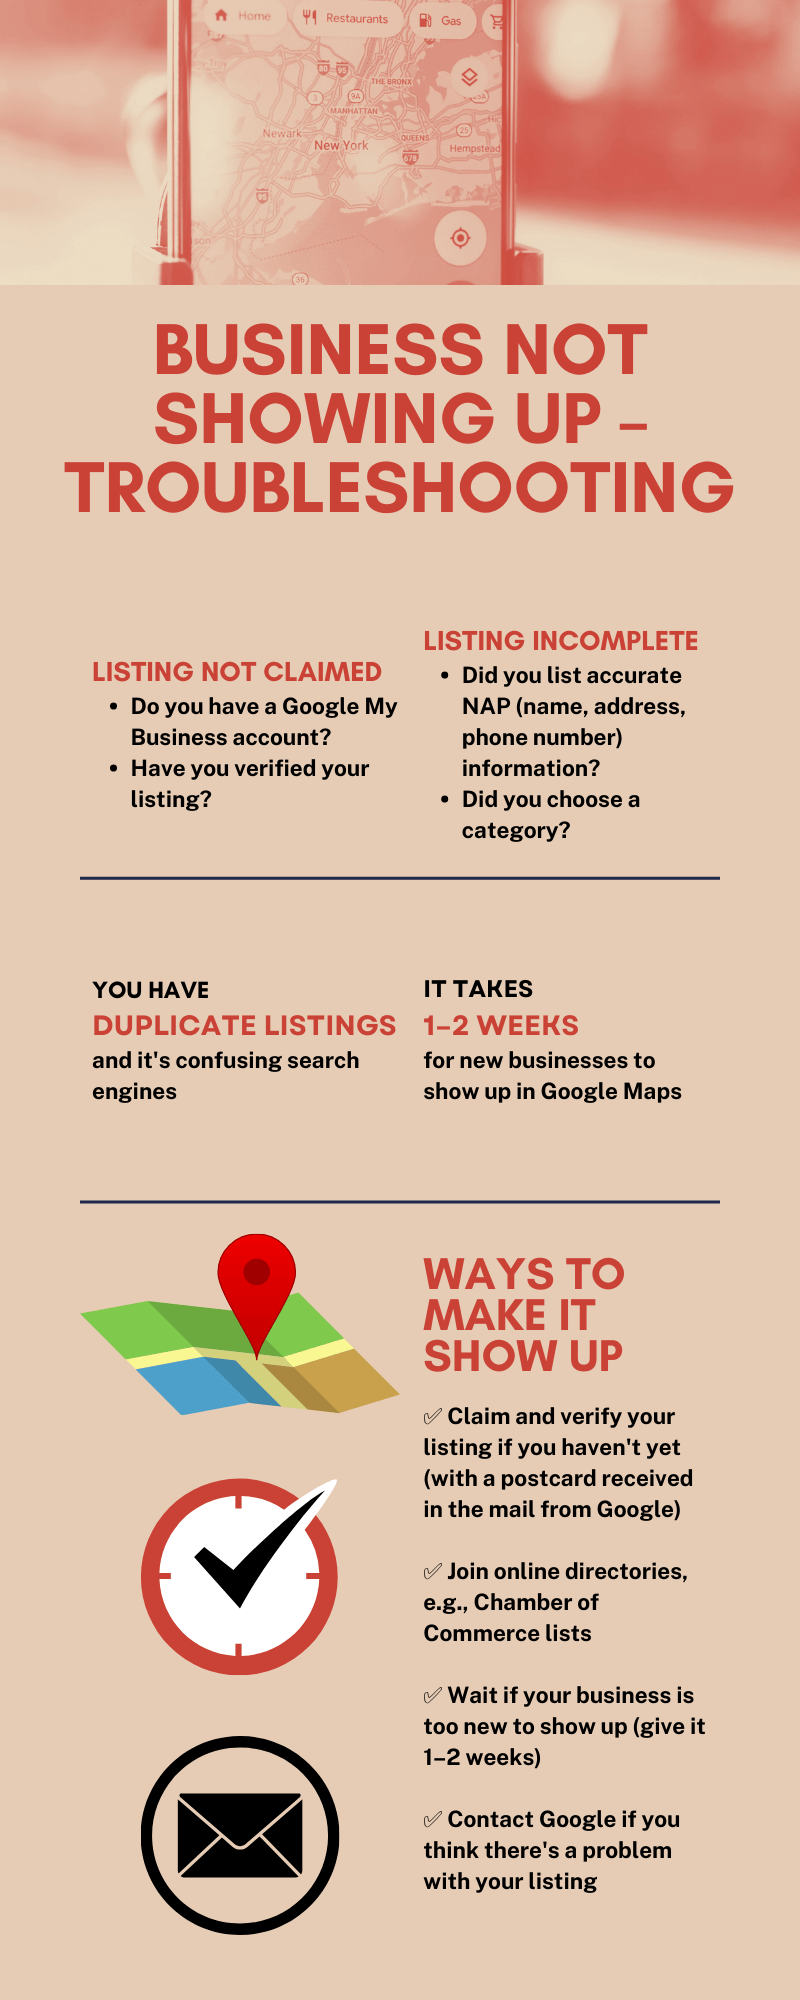 What Can I Do If Google My Business Is Not Showing My Listing?